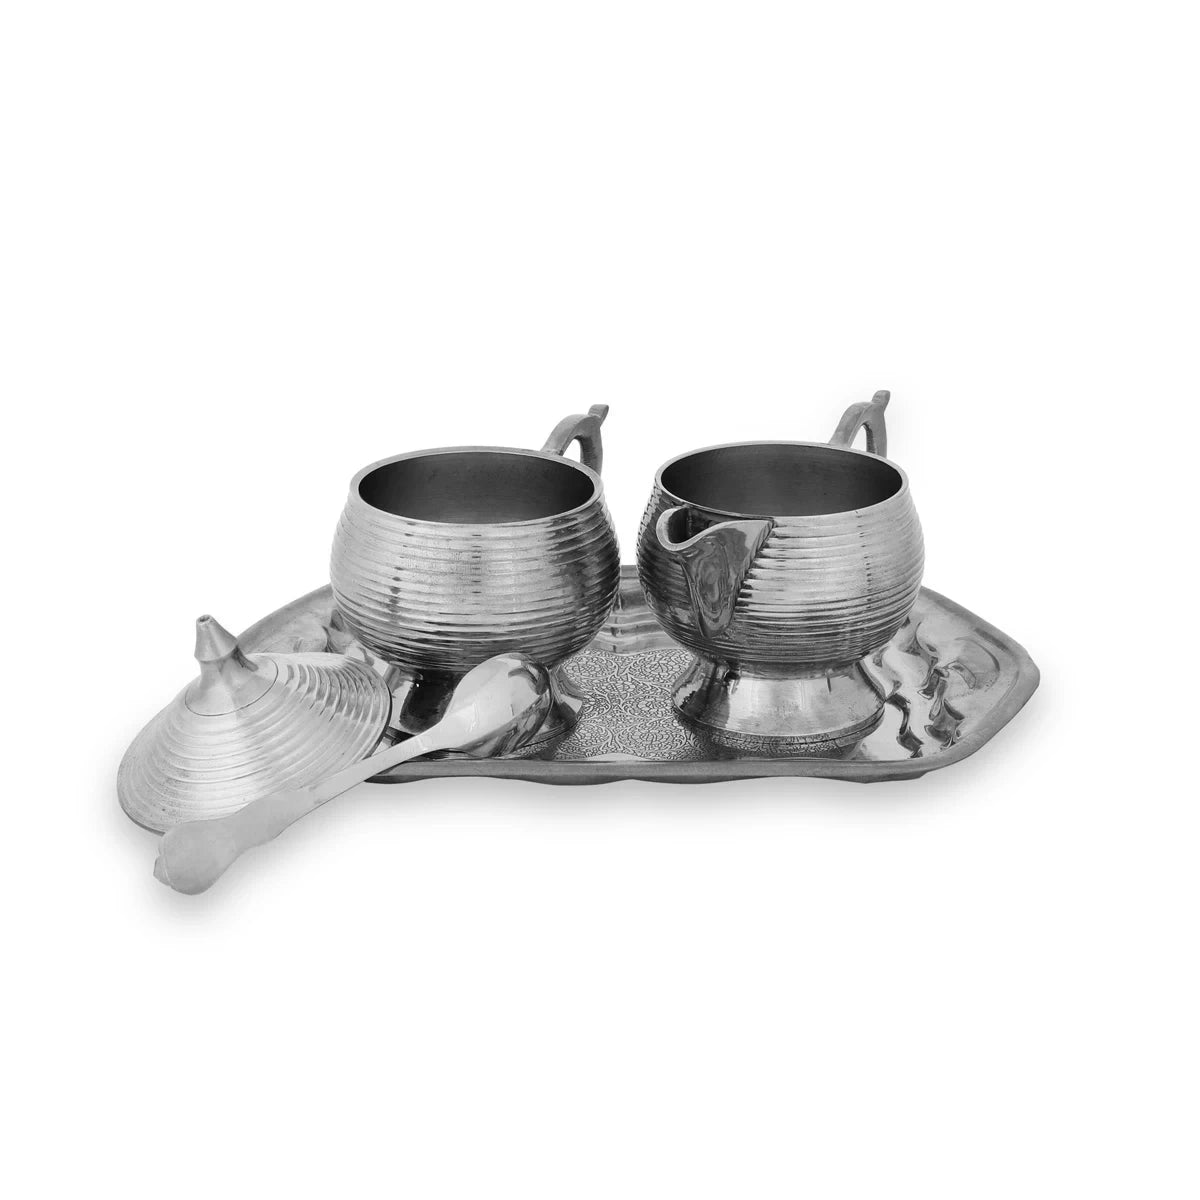 Front View of Shiny Silver Color Striped Brass Creamer Set - Showcasing Sugar Pot with Open Lid, Creamer Bowl, Spoon & Tray